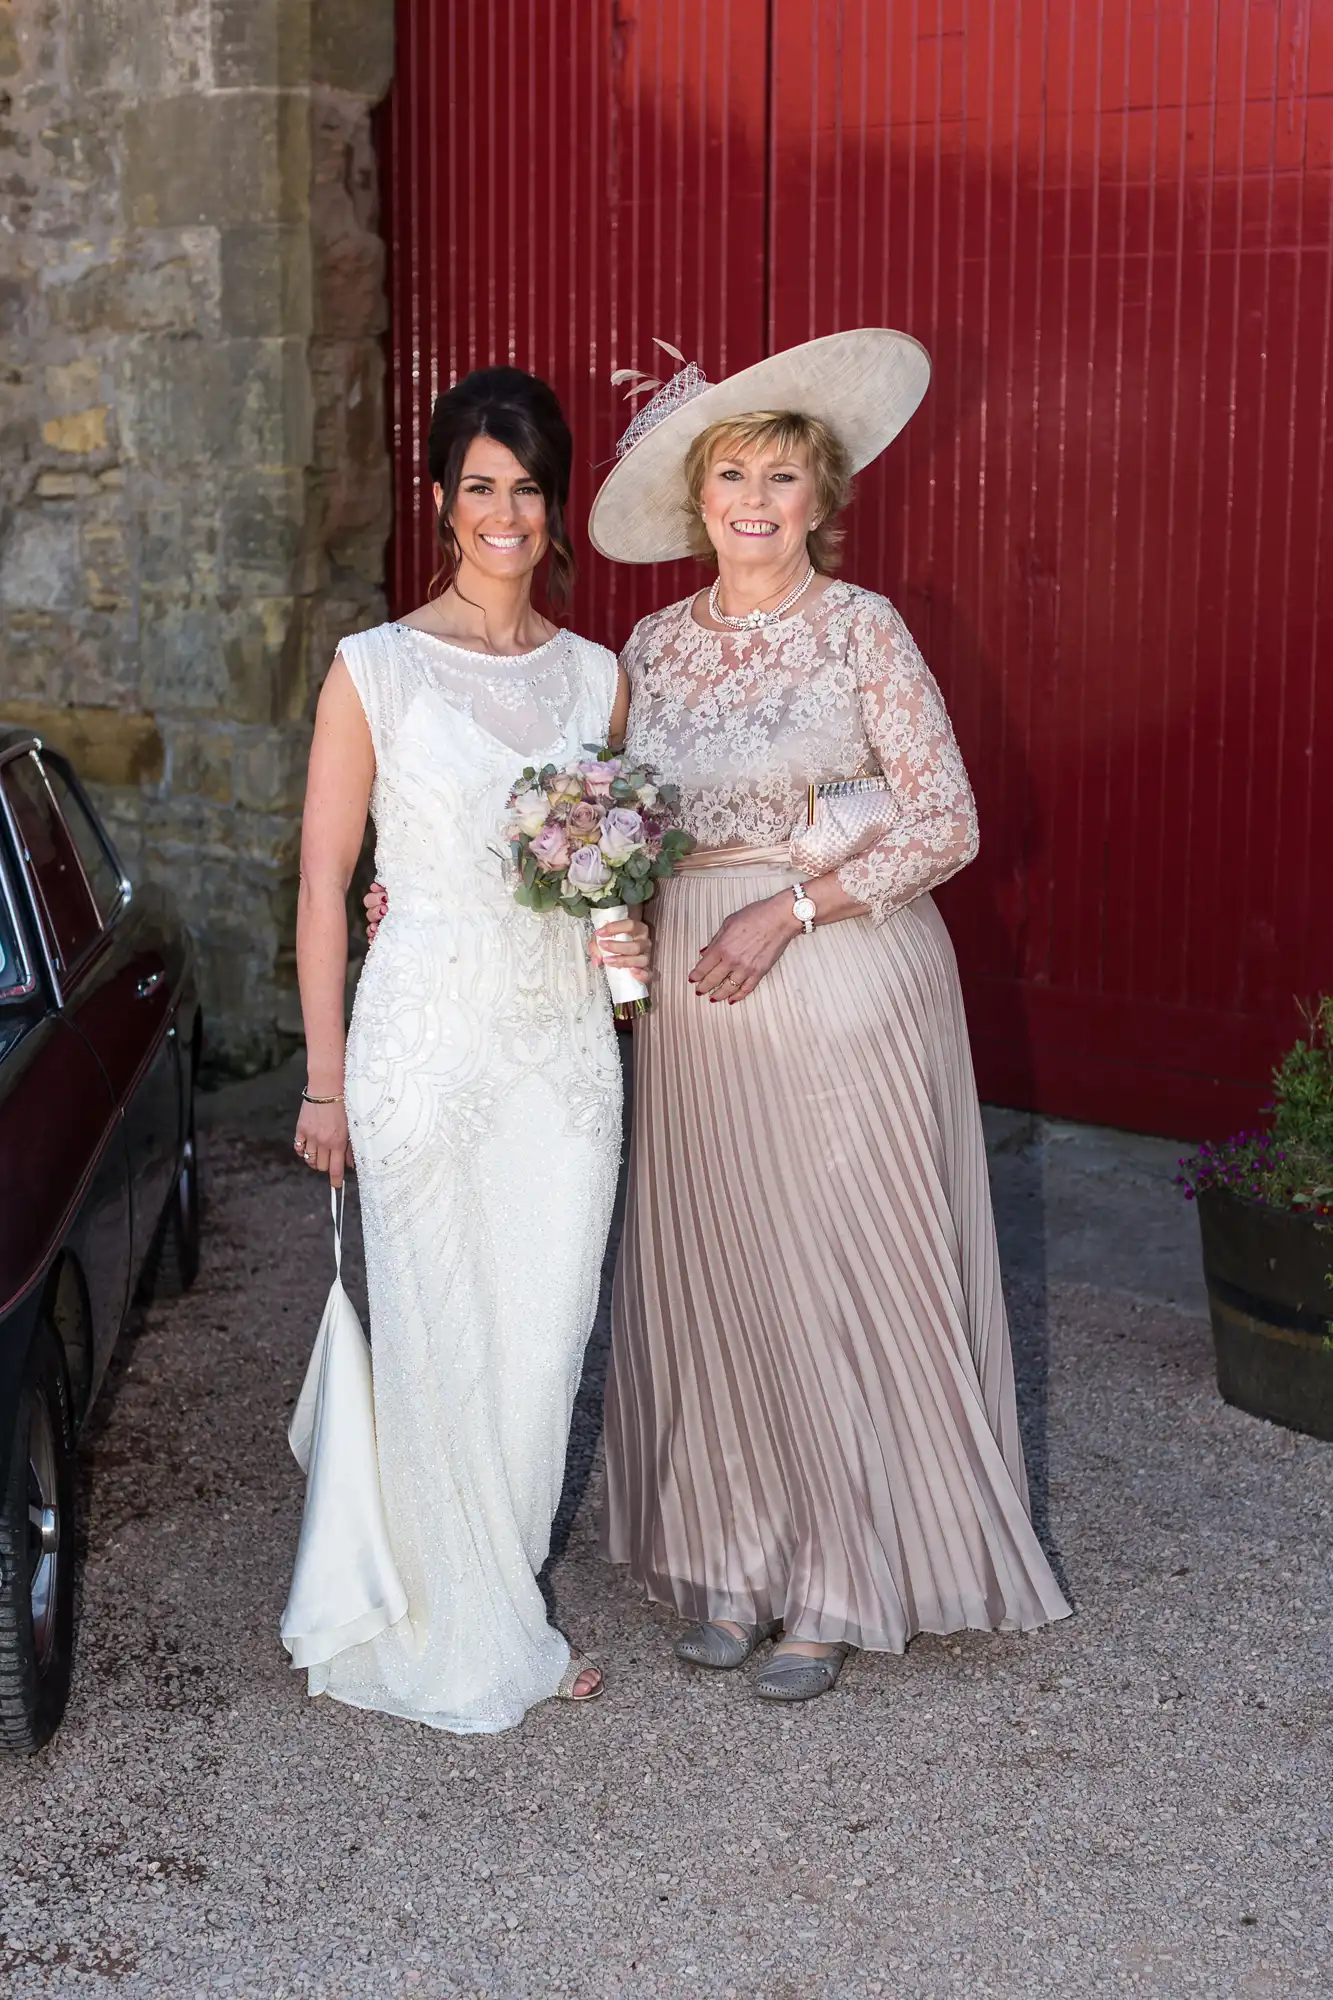 Two women dressed in formal wear posing with a bouquet, one in a wedding dress and the other in a long dress and hat, beside a vintage car.